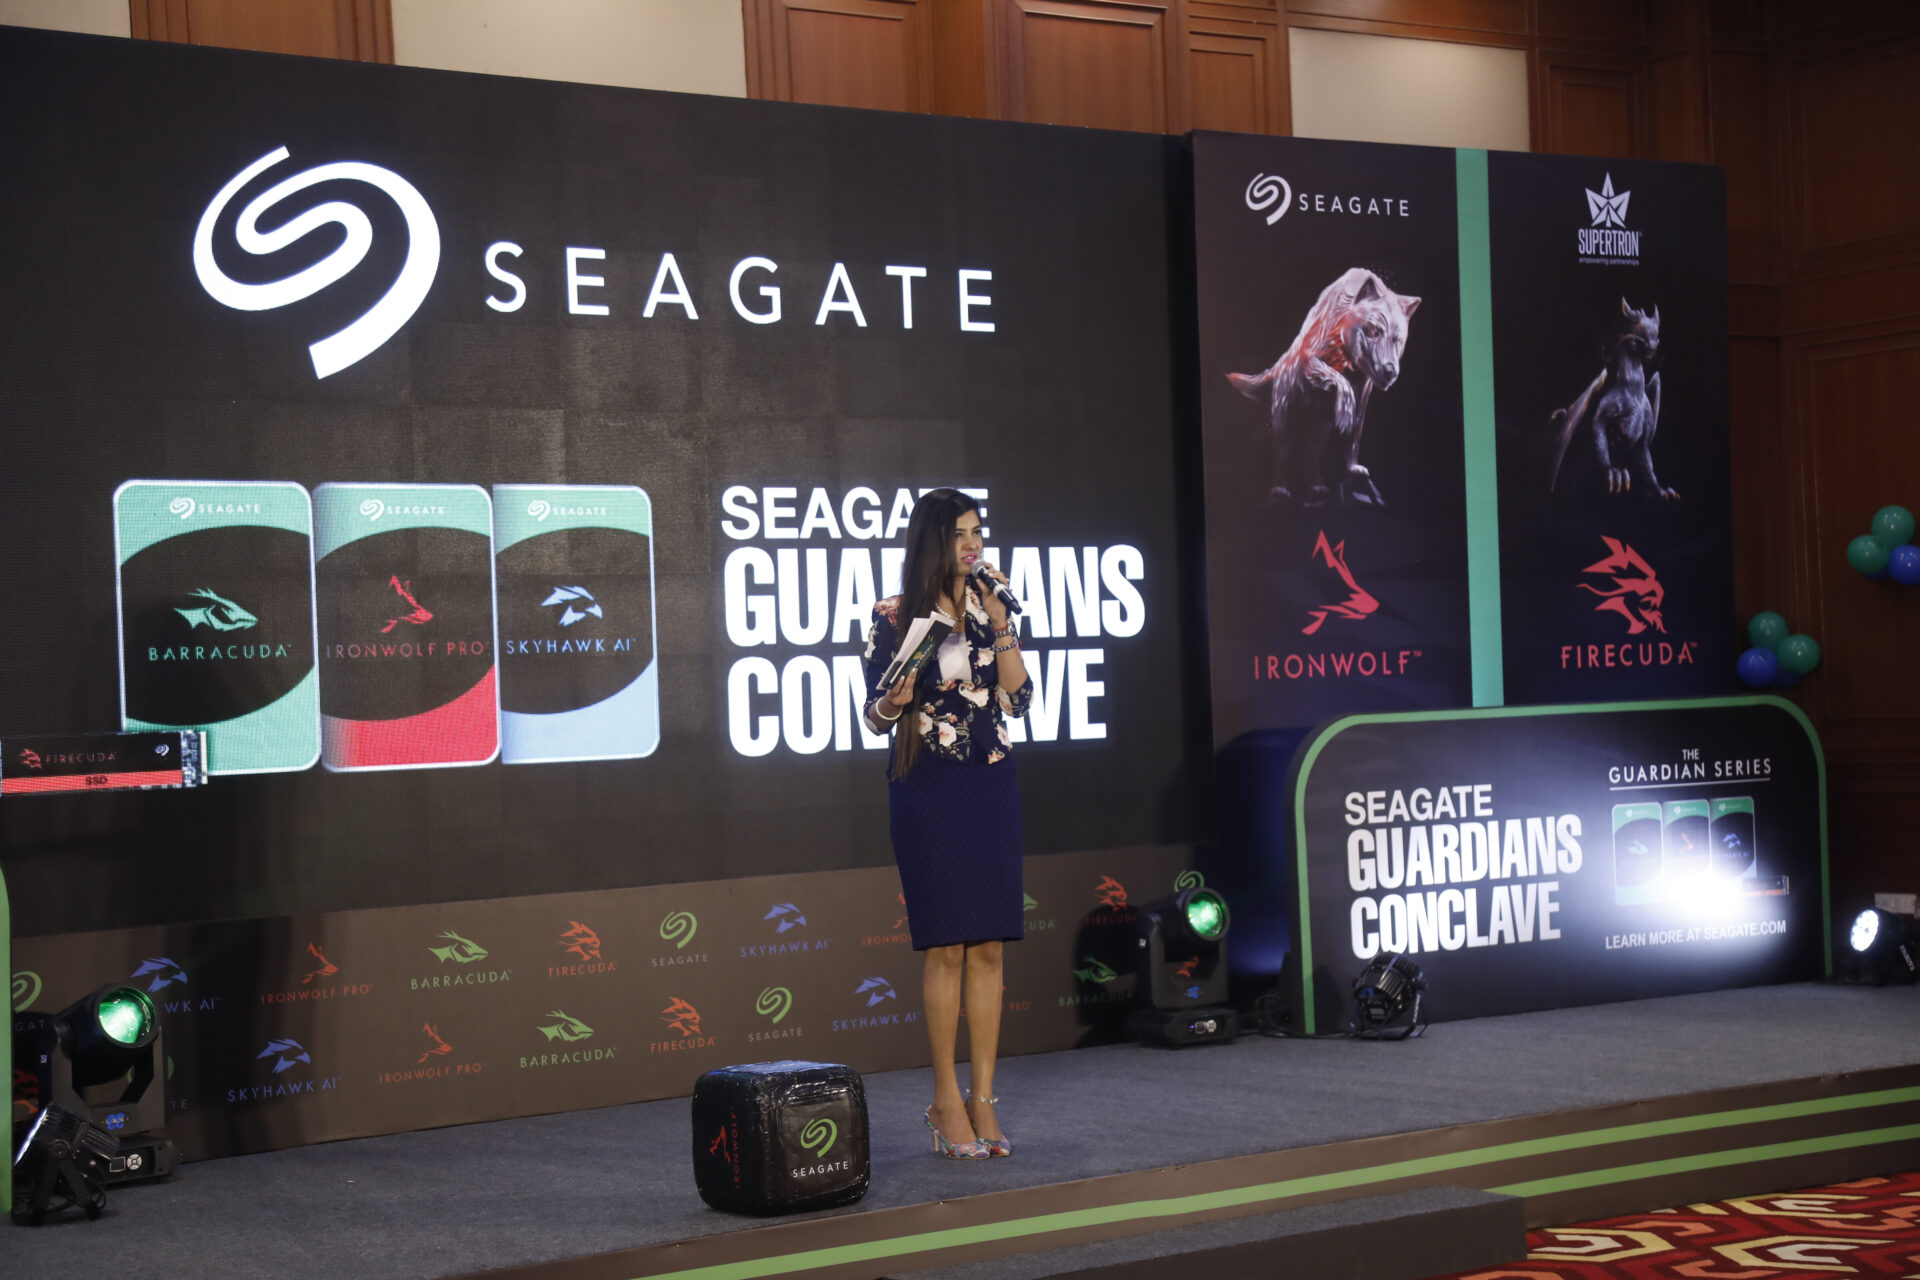 conference-workshop-event-management-done-by- ad-vantage-for-seagate